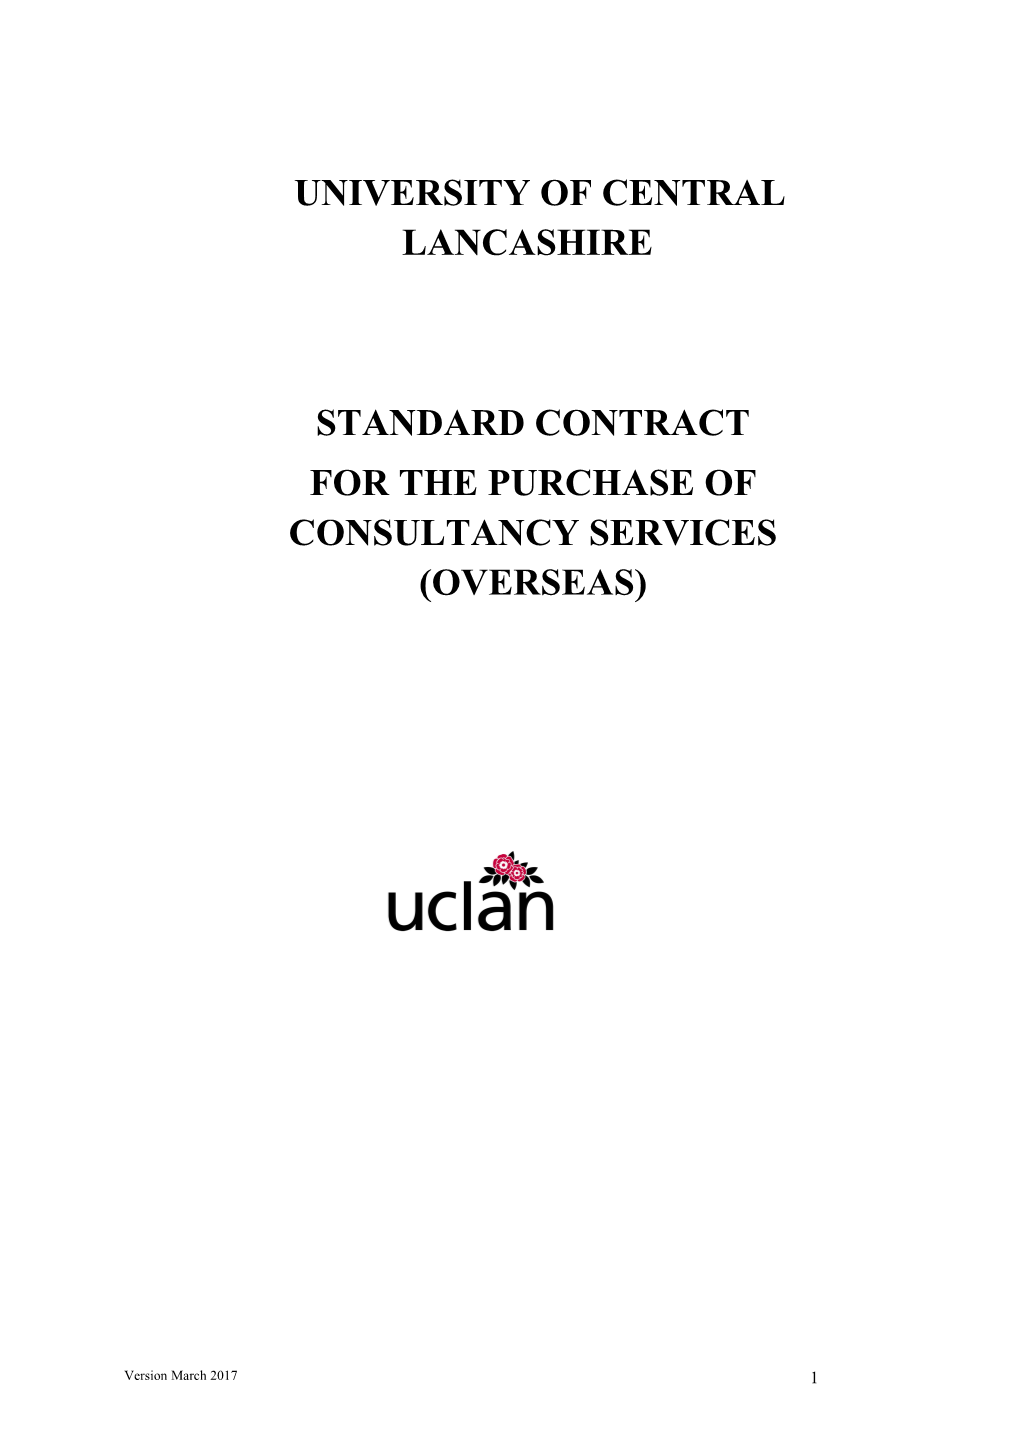 Conditions of Contract for the Provision of Consultancy for Overseas Suppliers Only